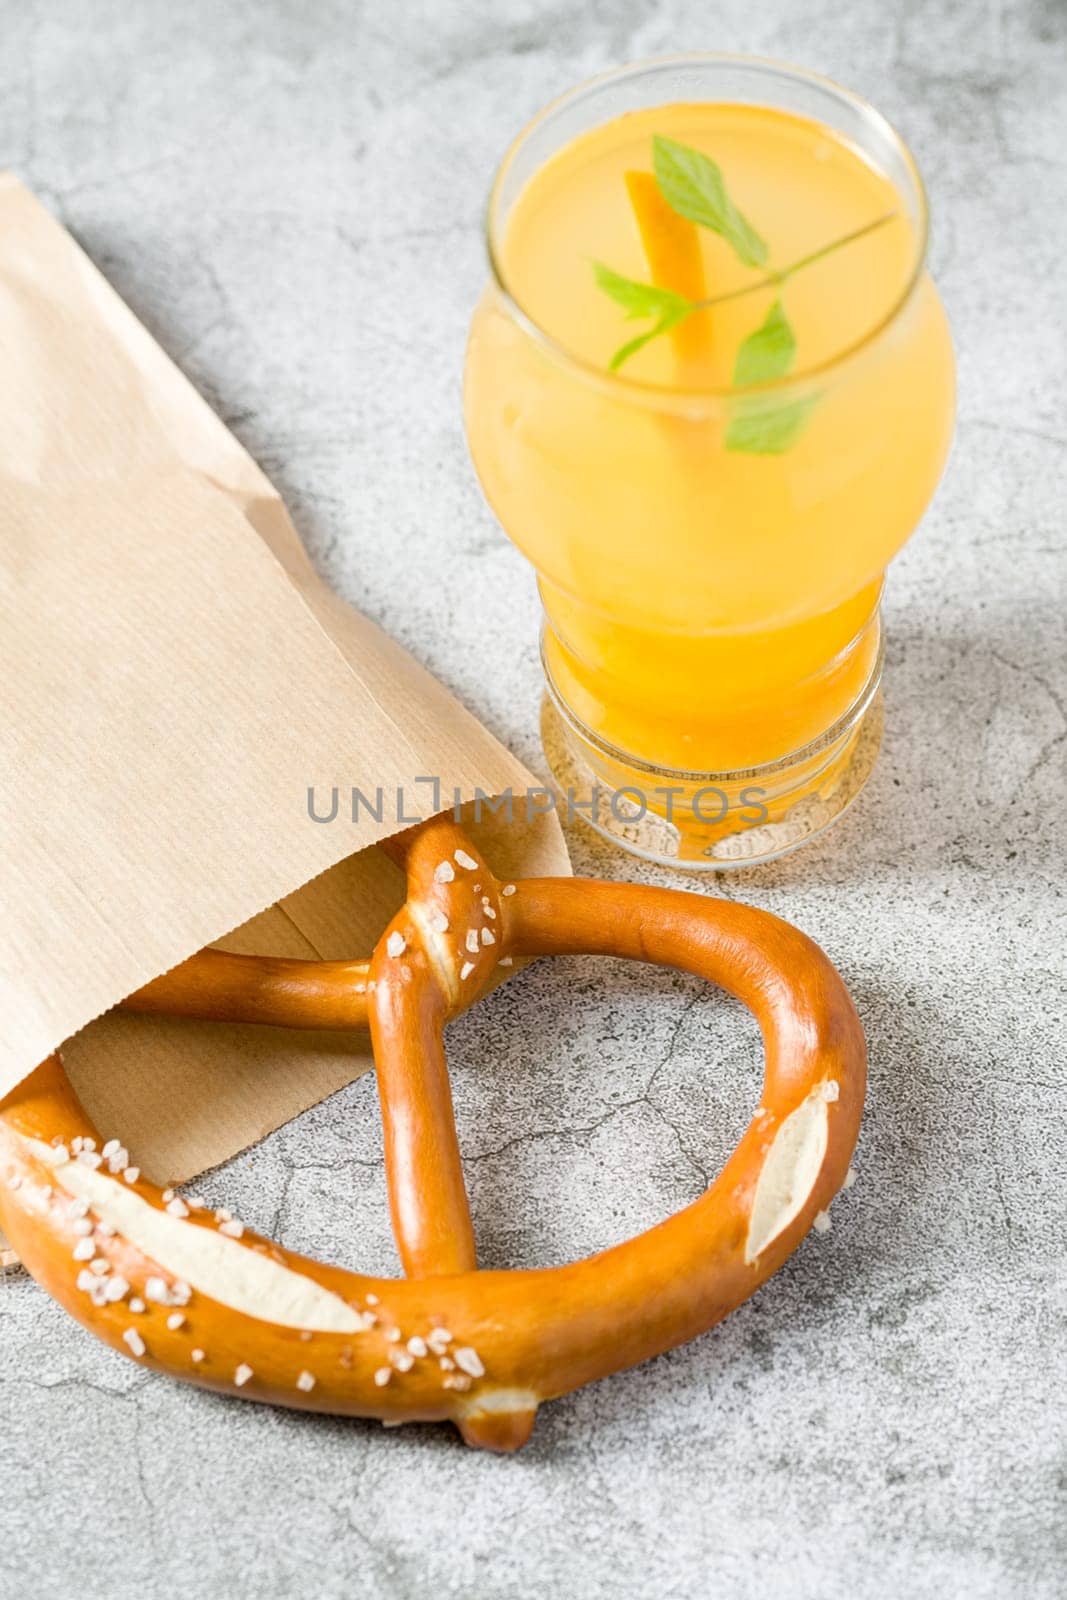 Pretzel wrapped in wrapping paper with drink next to it on stone table